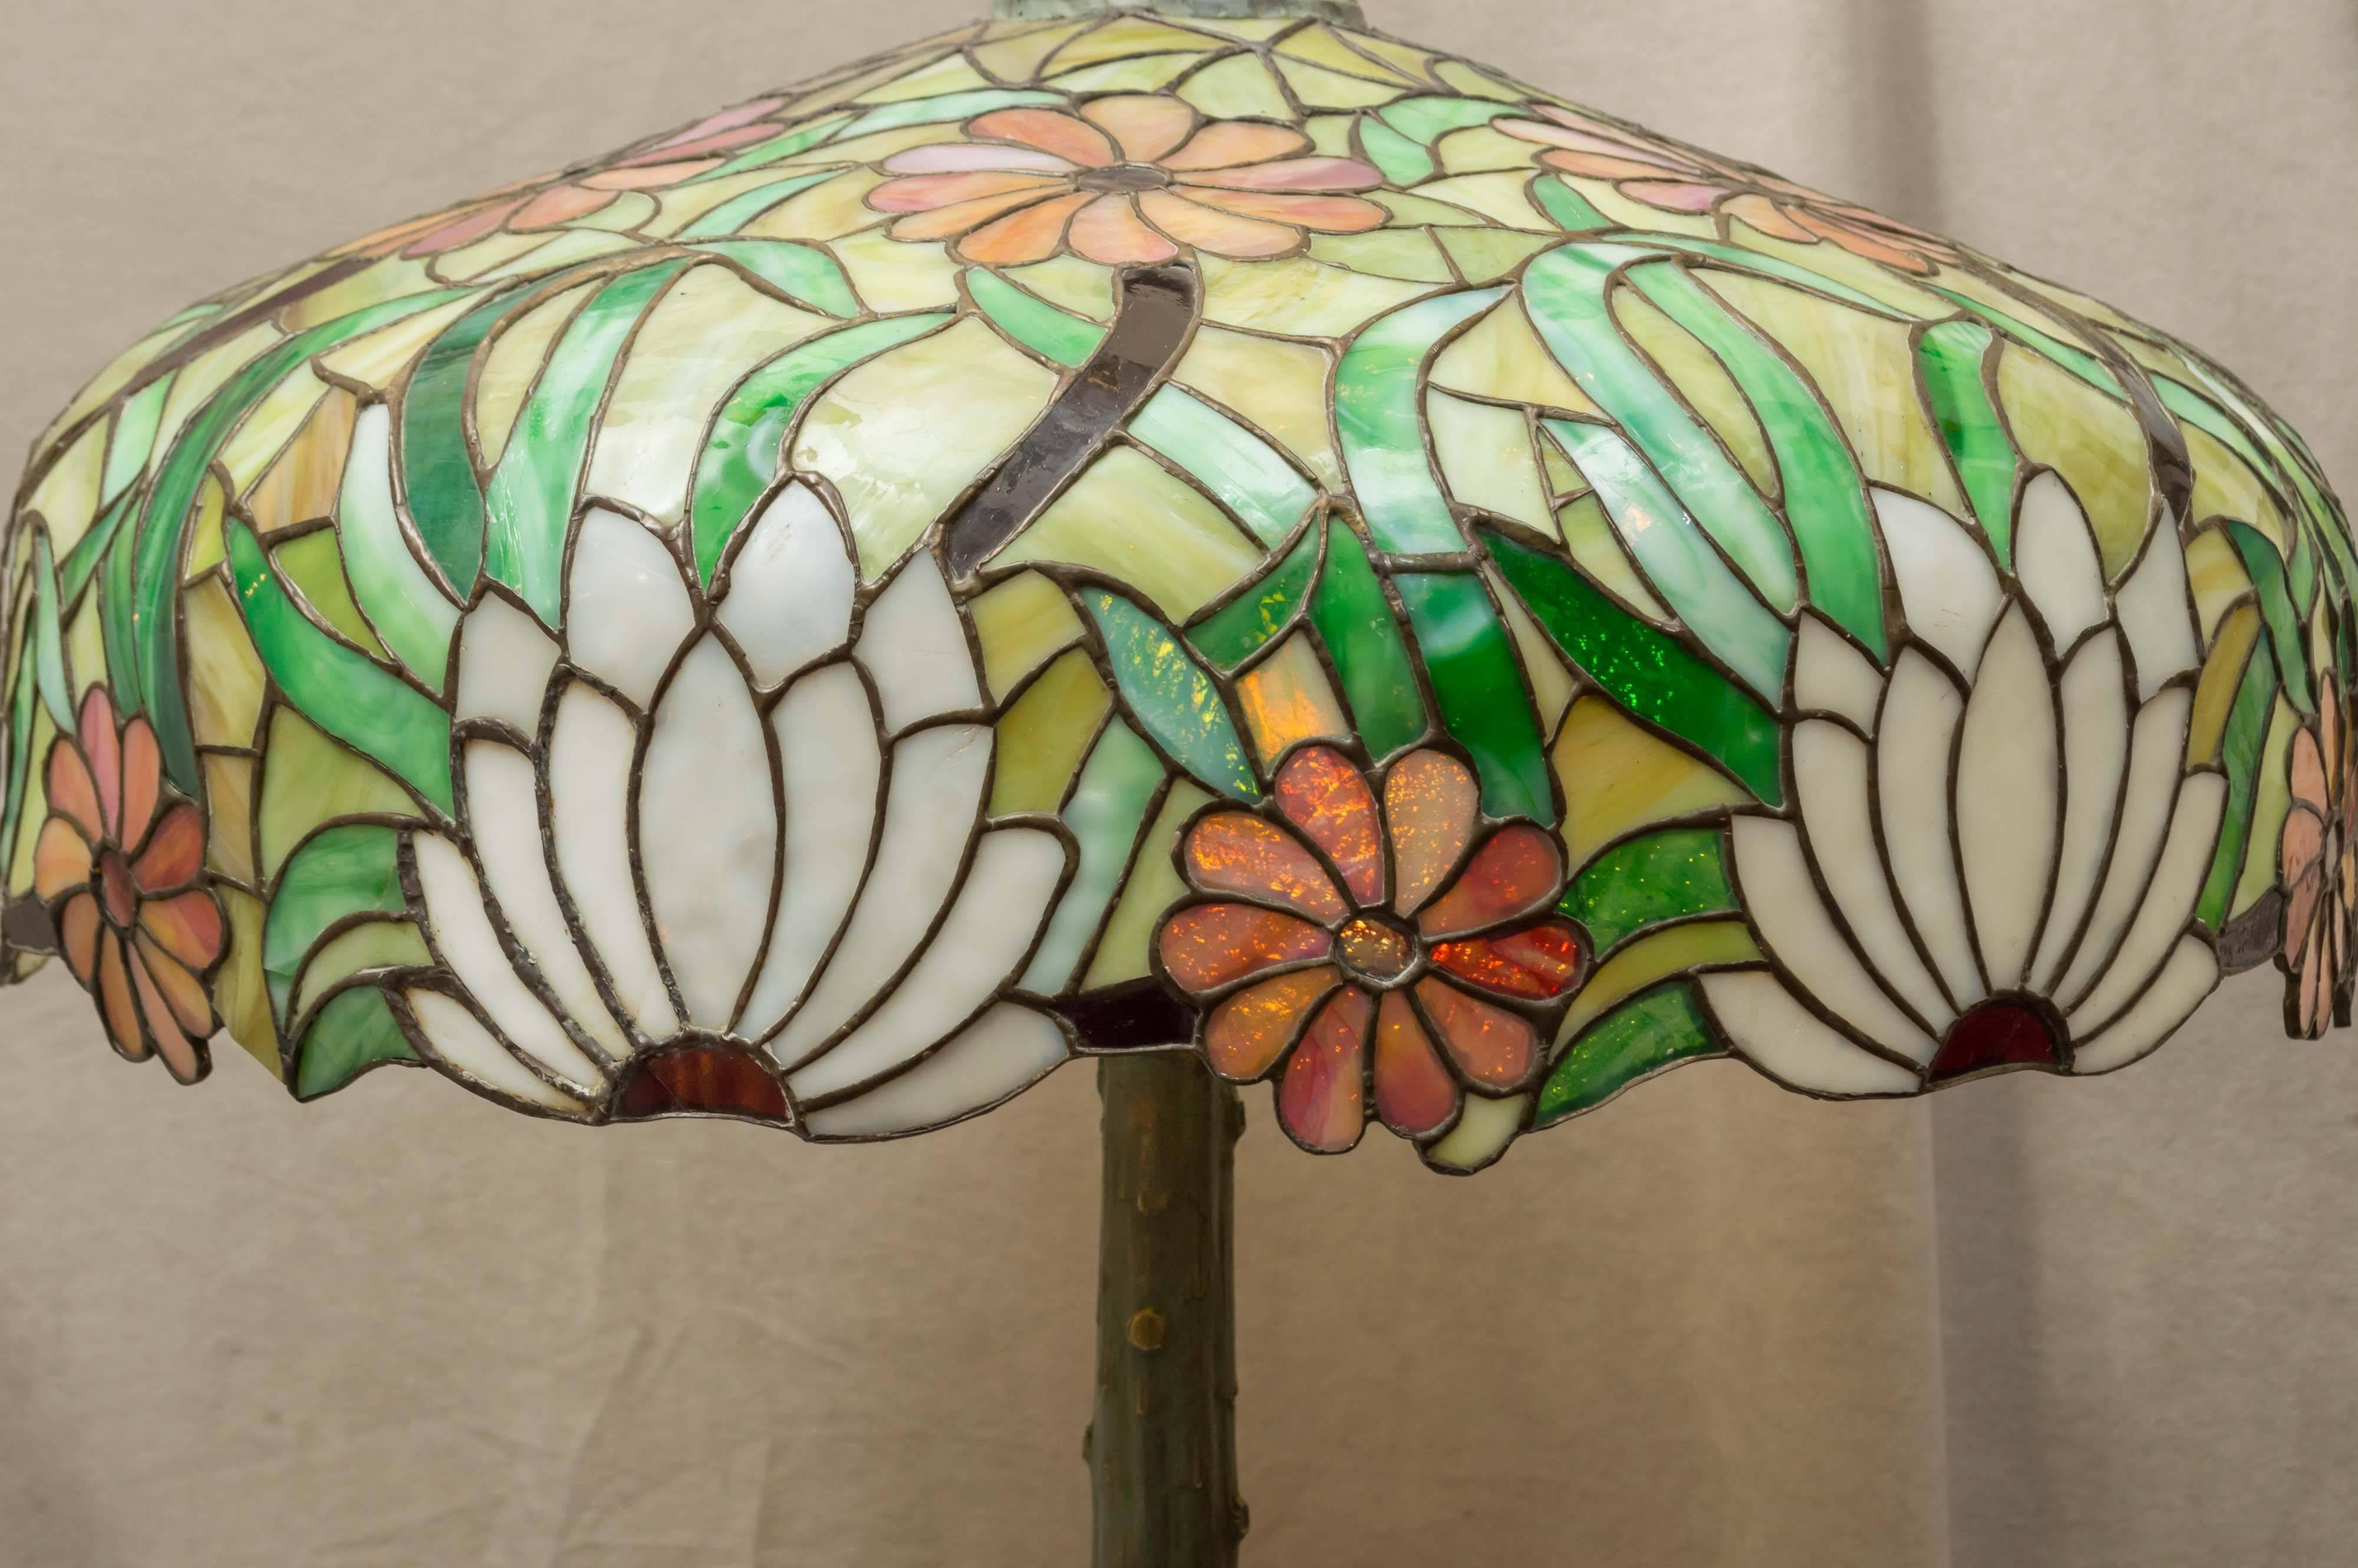 Hand-Crafted Large Leaded Glass Table Lamp, circa 1910 by the Miller Lamp Company